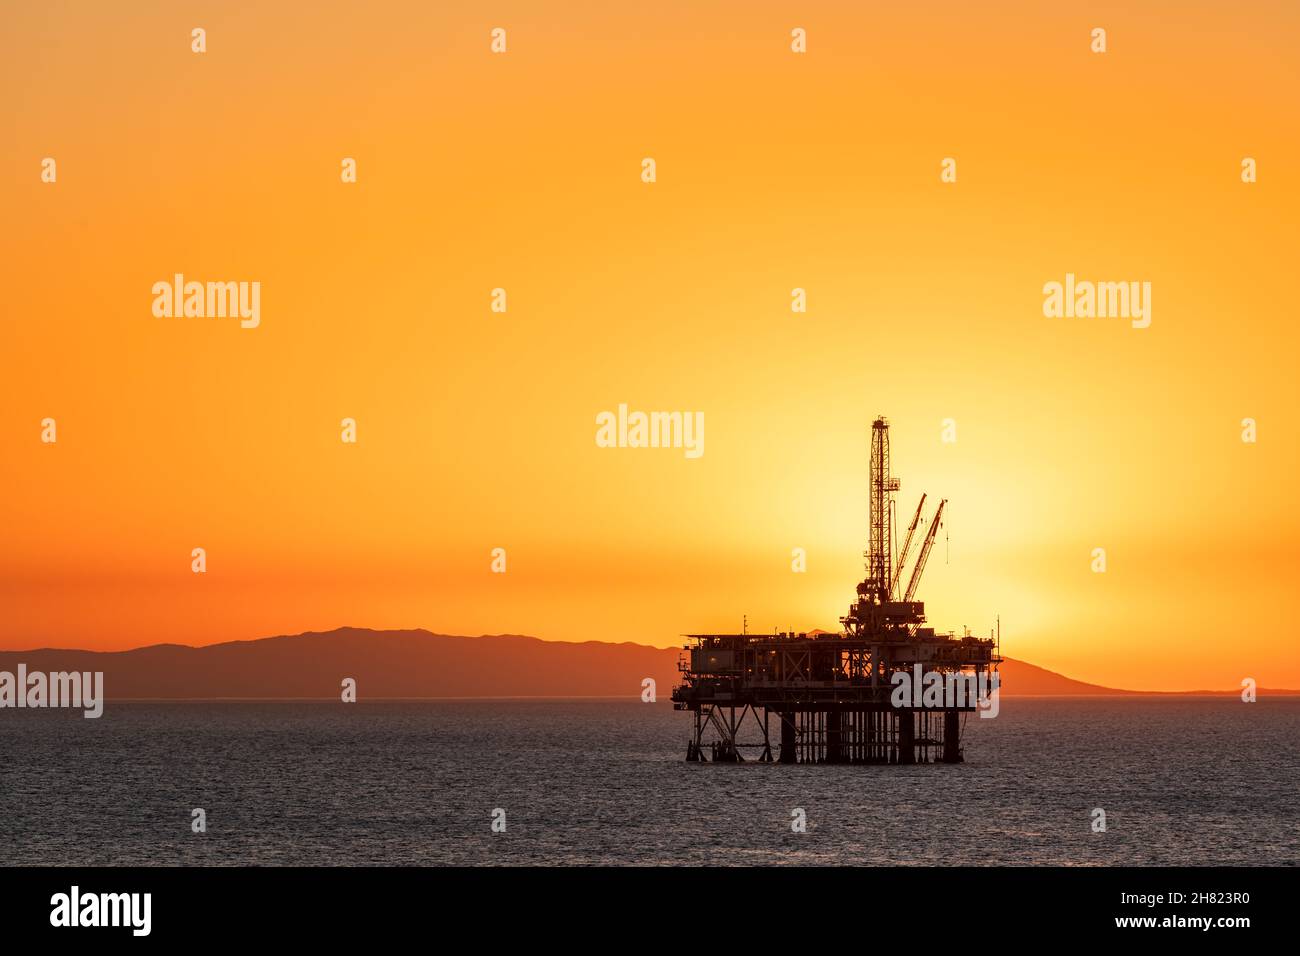 Offshore oil platform off the coast of California against a moody, orange sky as the sun sets behind the rig. Stock Photo